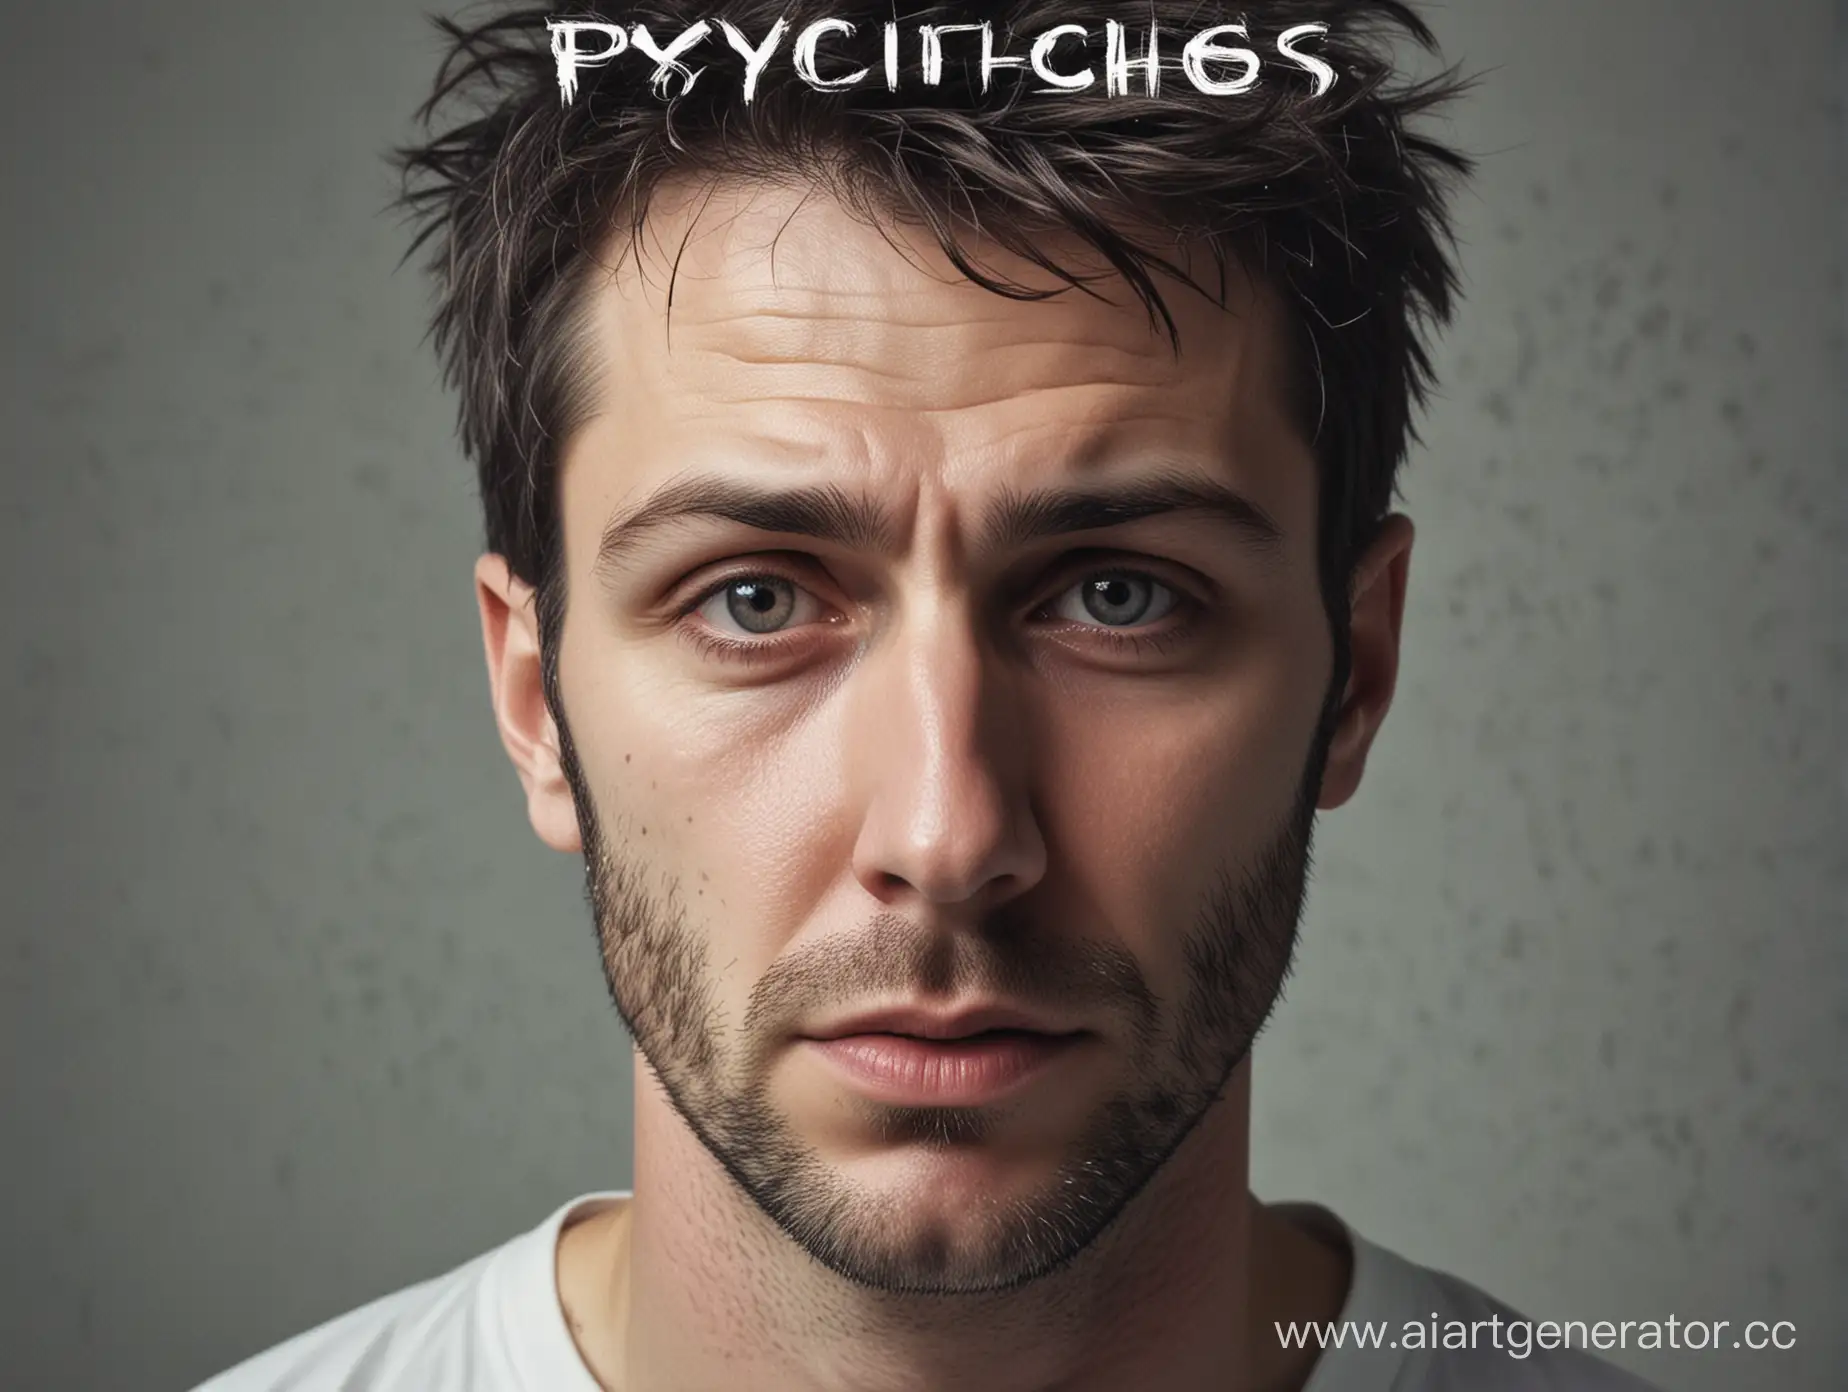 Book-Cover-CYCLICITY-OF-PSYCHOS-Depicting-a-32YearOld-Man-with-Mental-Disorder